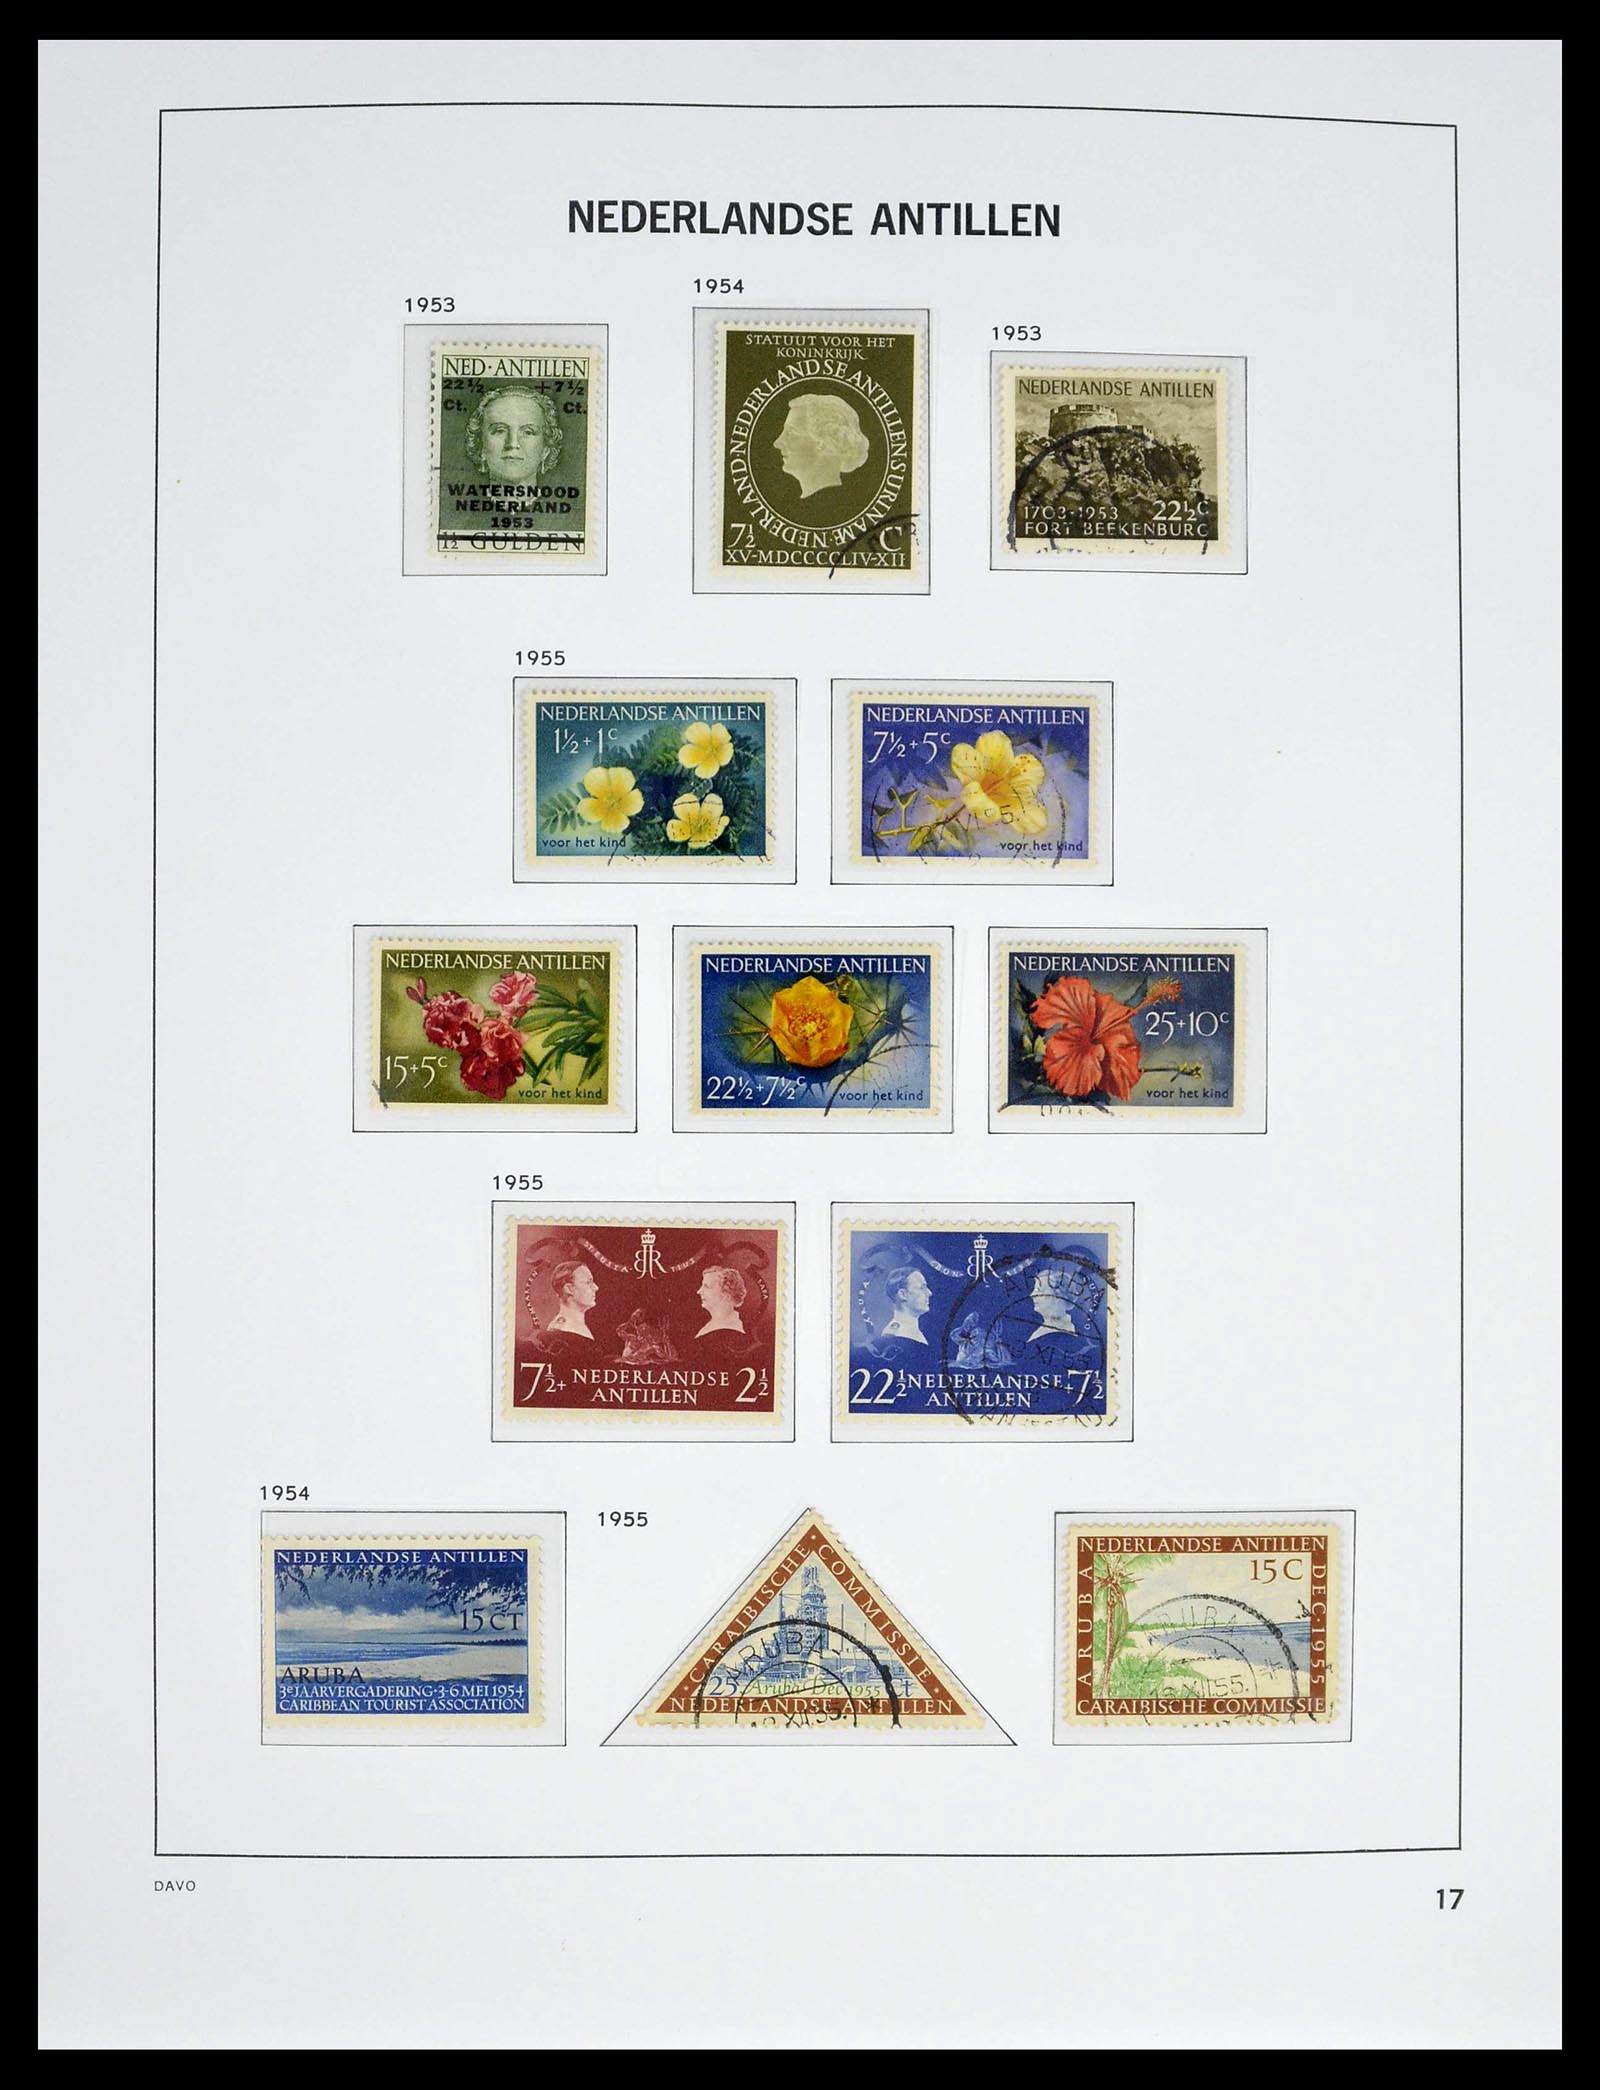 39360 0017 - Stamp collection 39360 Curaçao/Antilles complete 1873-2013.